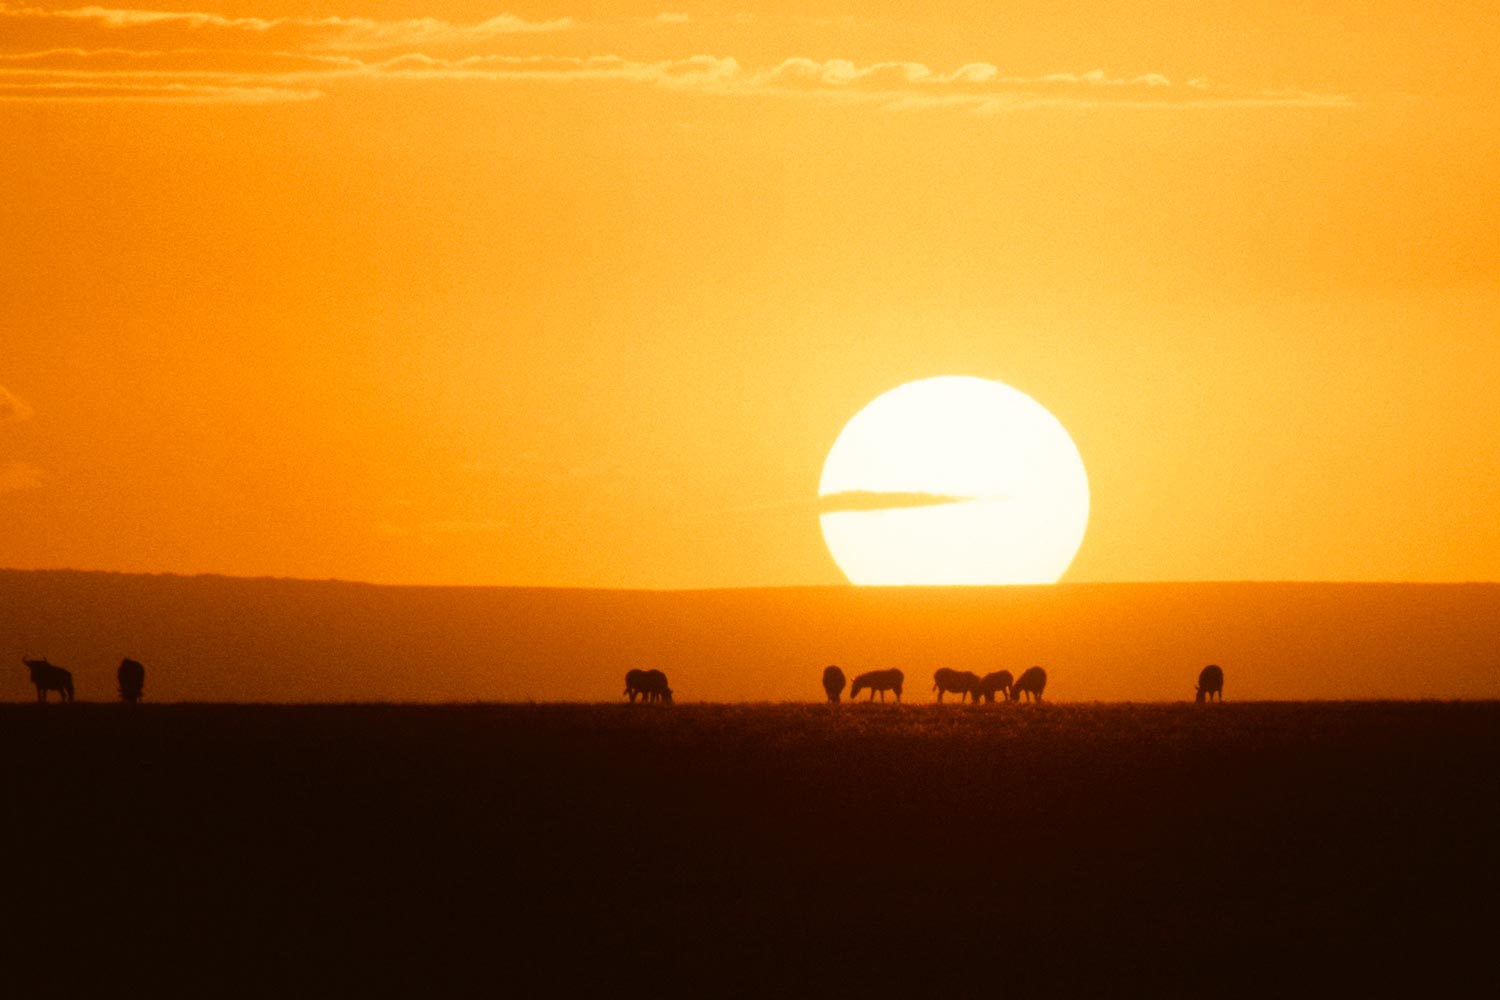 Sun going down with silhouettes of animals on the horizon